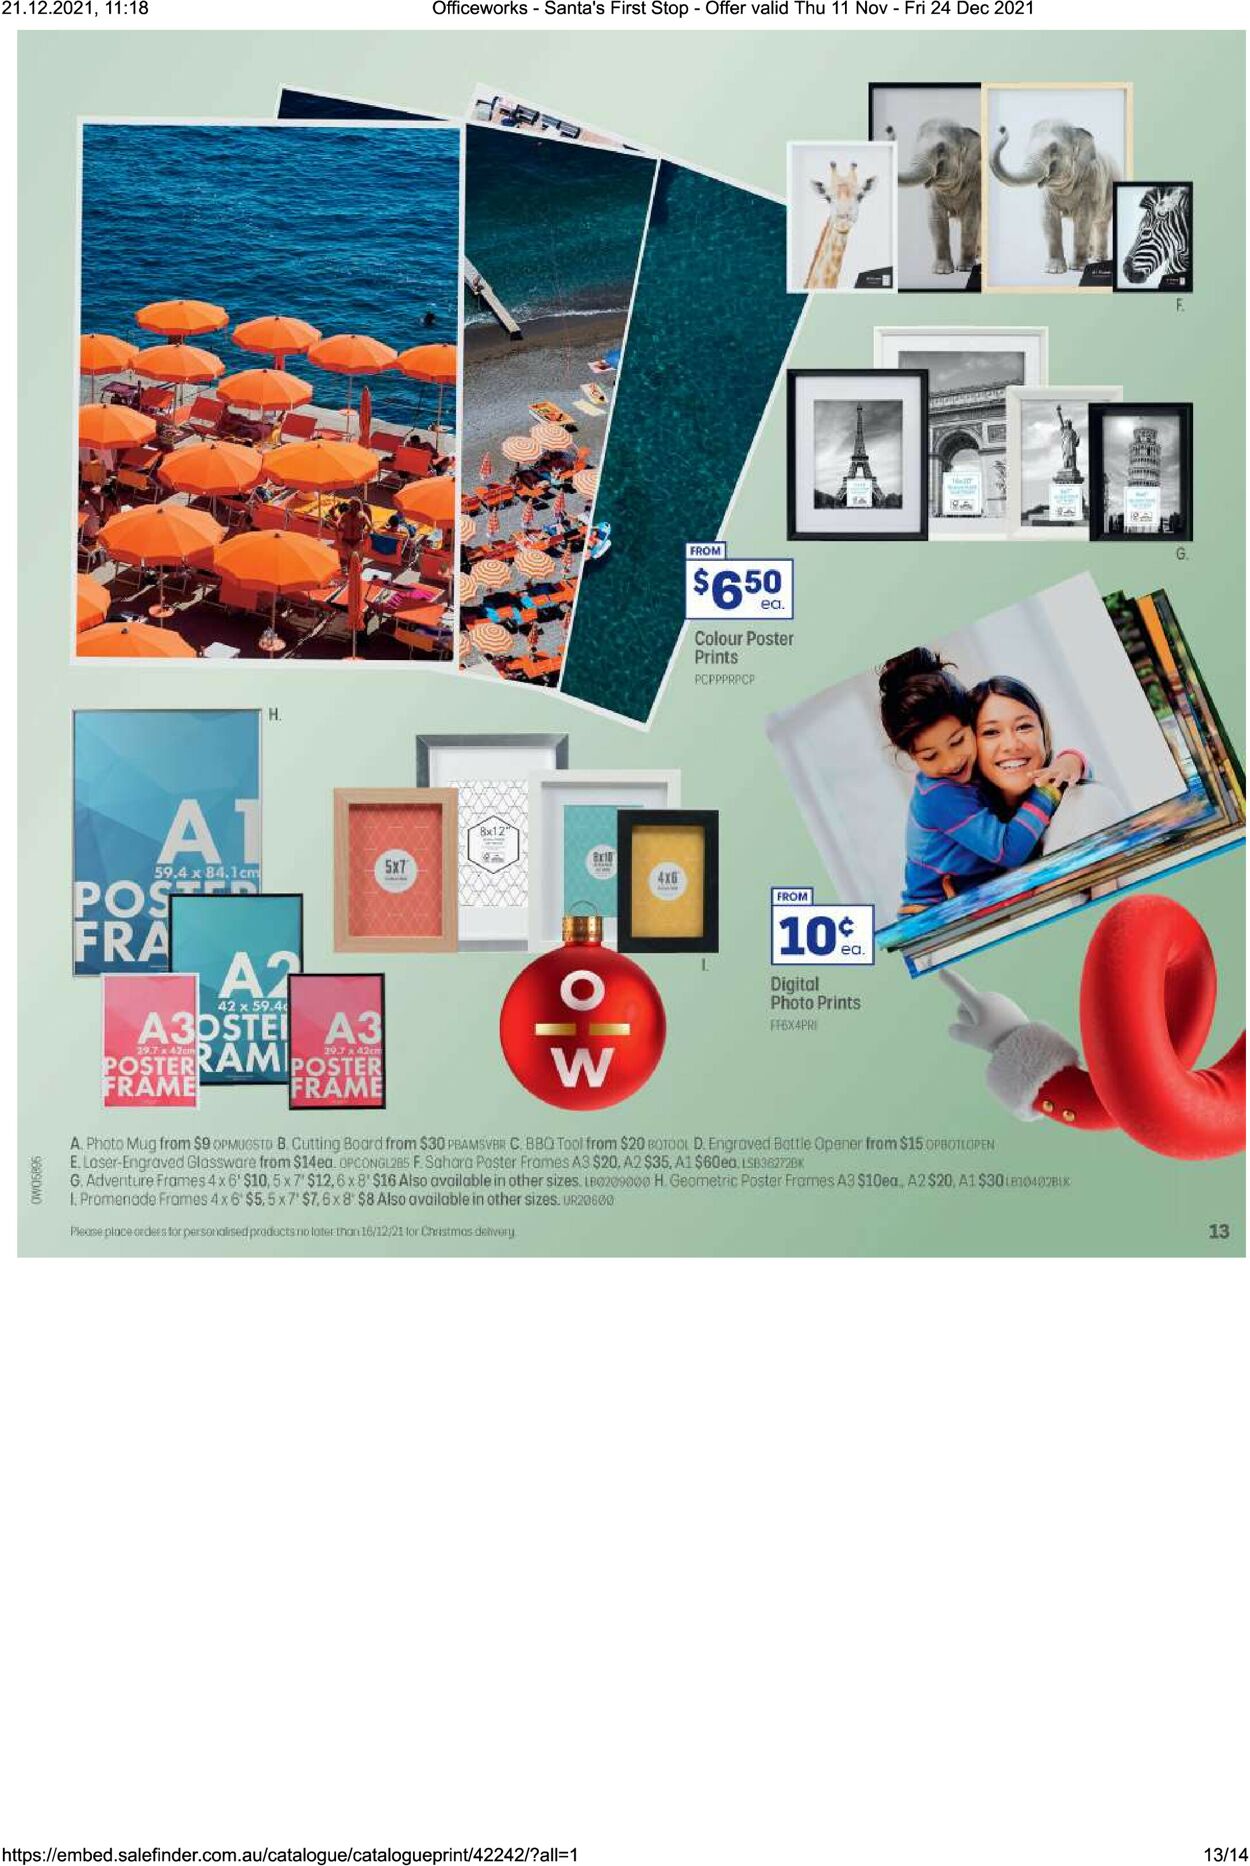 Catalogue Officeworks 11.12.2021 - 24.12.2021